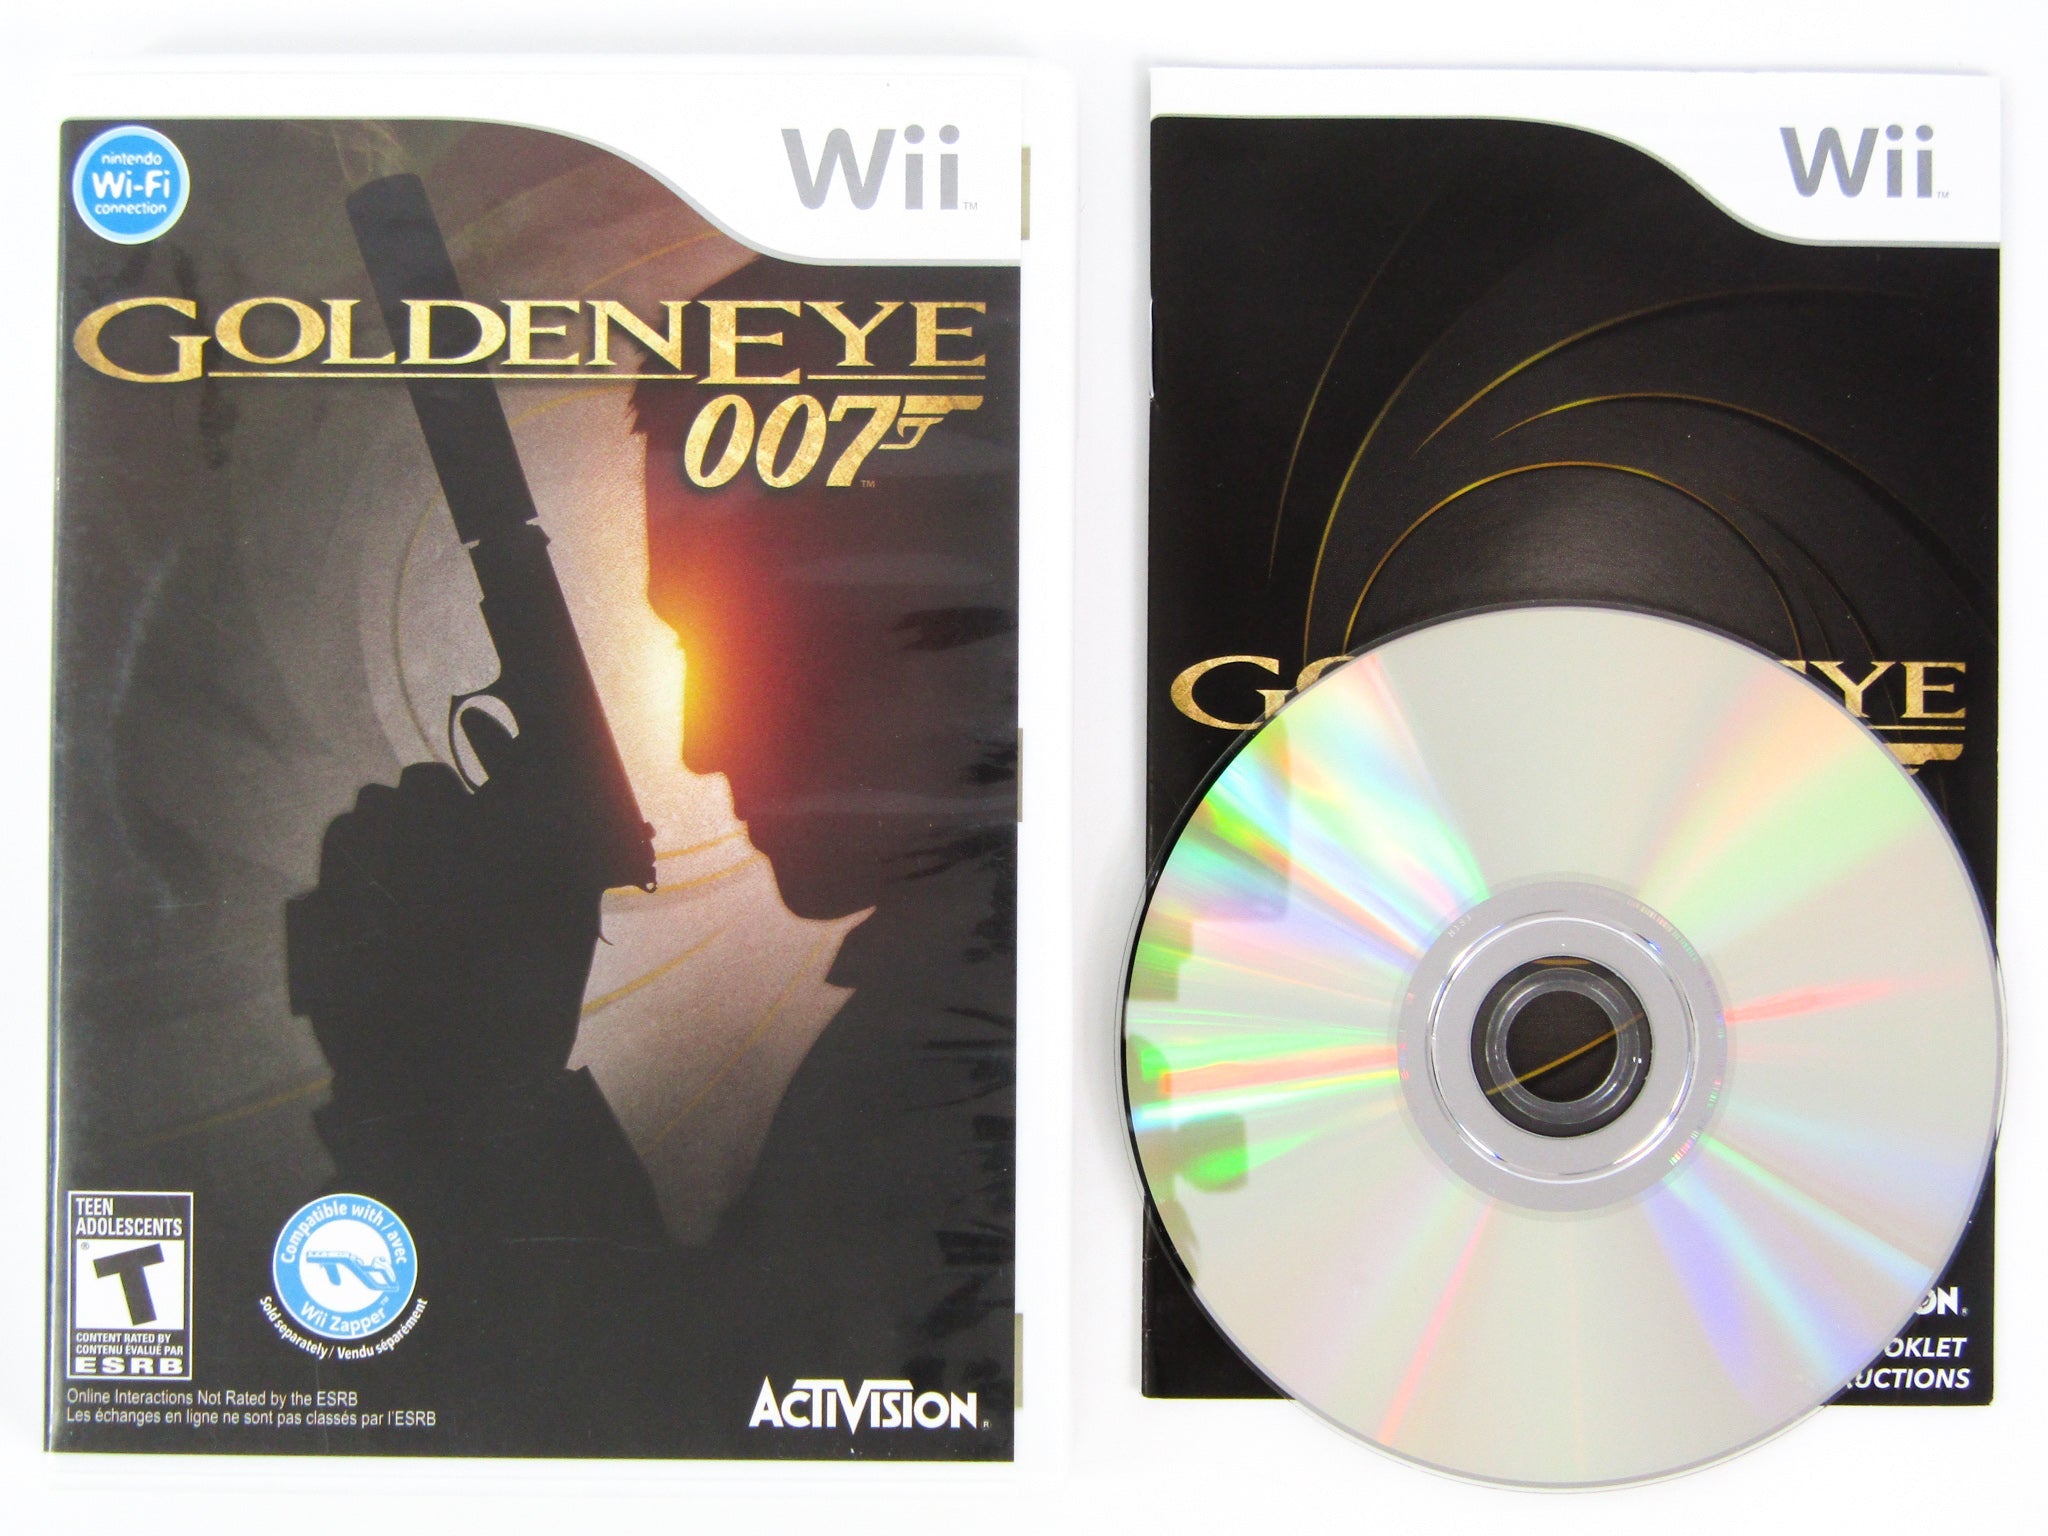 5464: FitterSpace's Wii GoldenEye: 007 007 Classic difficulty in  1:41:35.67 - Submission #5464 - TASVideos